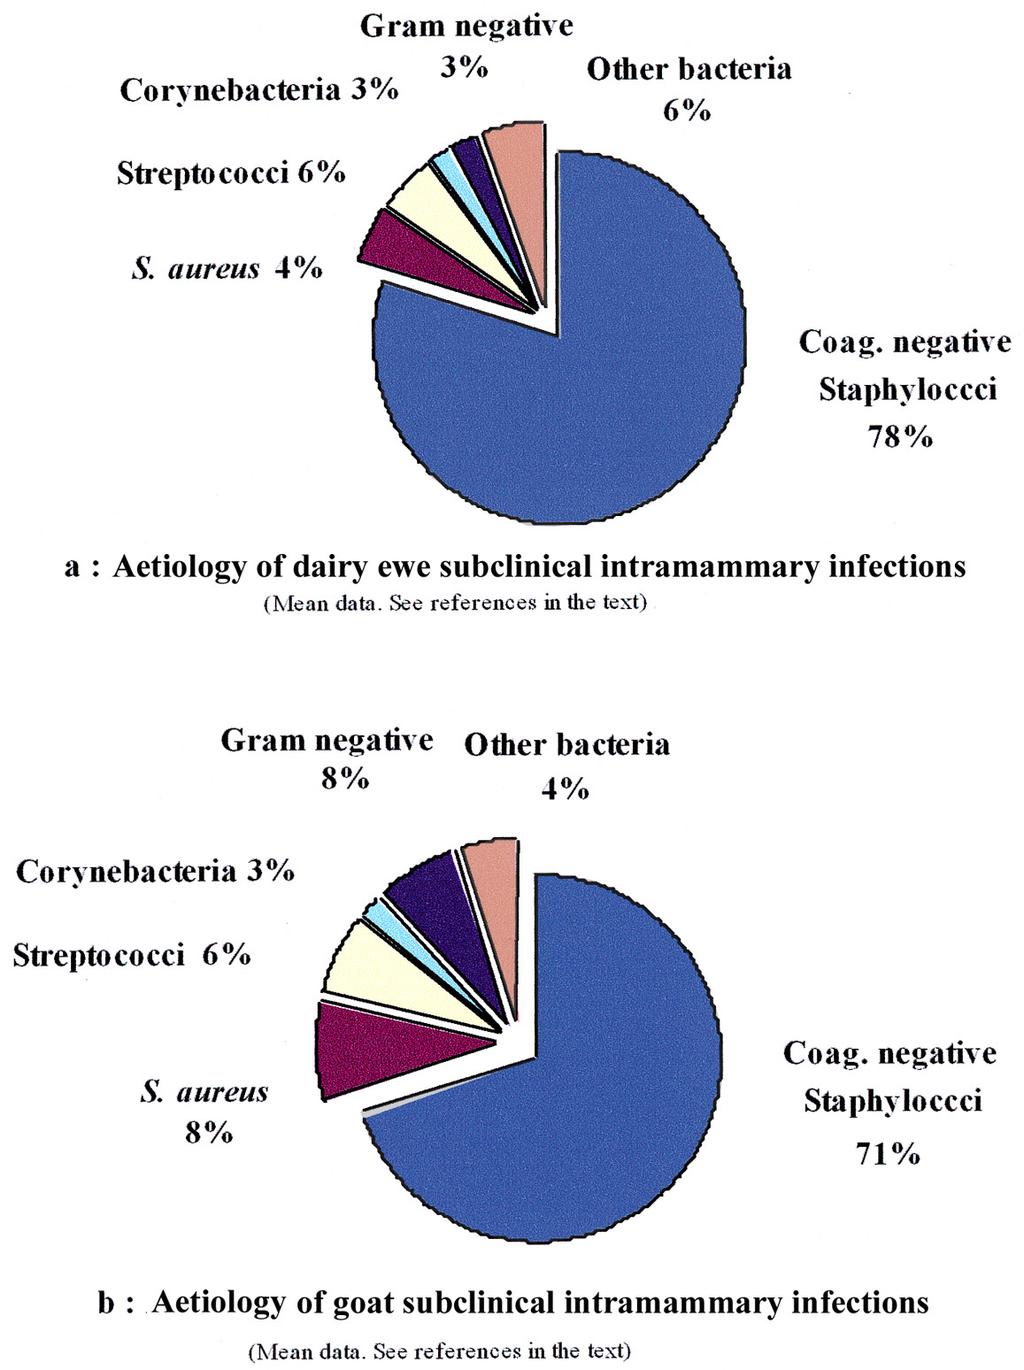 Mastitis of dairy small ruminants 691 2. AETIOLOGY 2.1. Clinical mastitis In sporadic cases for sheep and goats, the high prevalence of Staphylococcus aureus has often been reported.